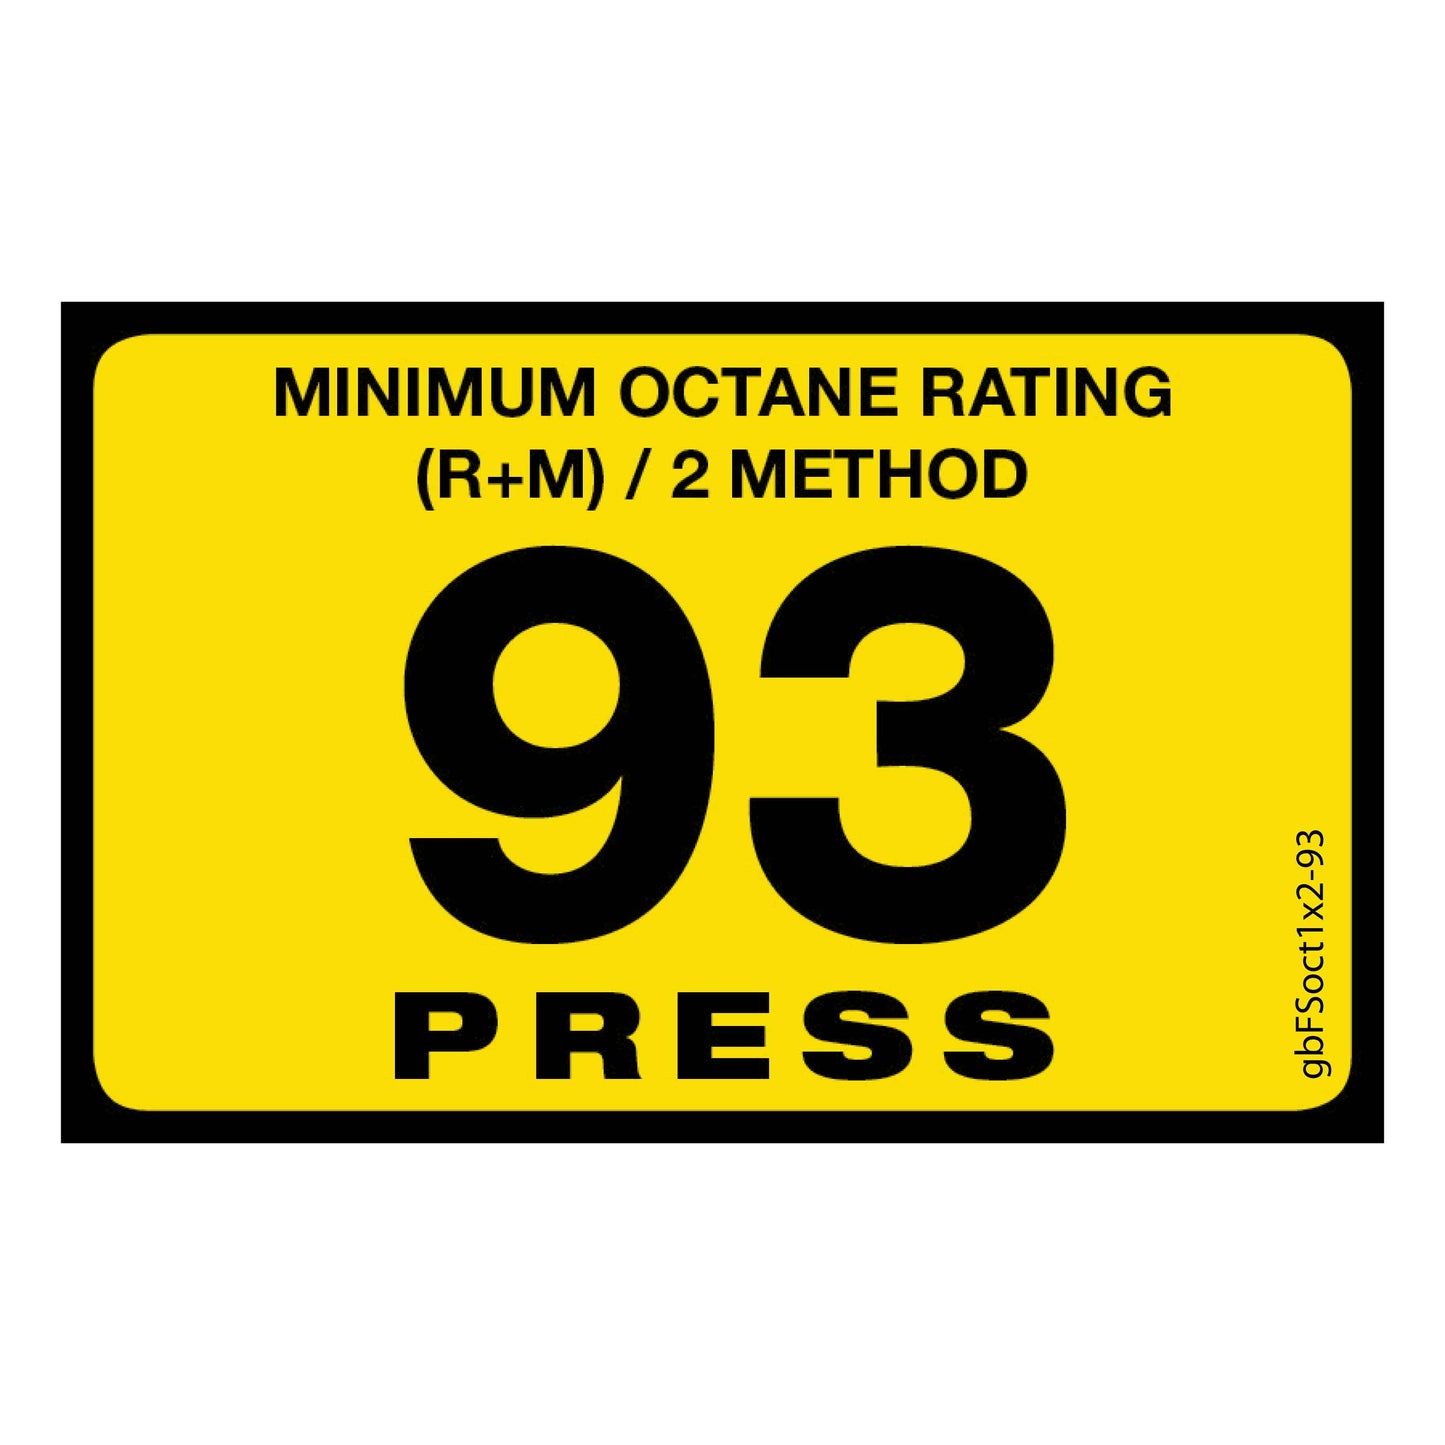 93 Press Octane Rating Decal. 1 inch by 2 inches in size. 